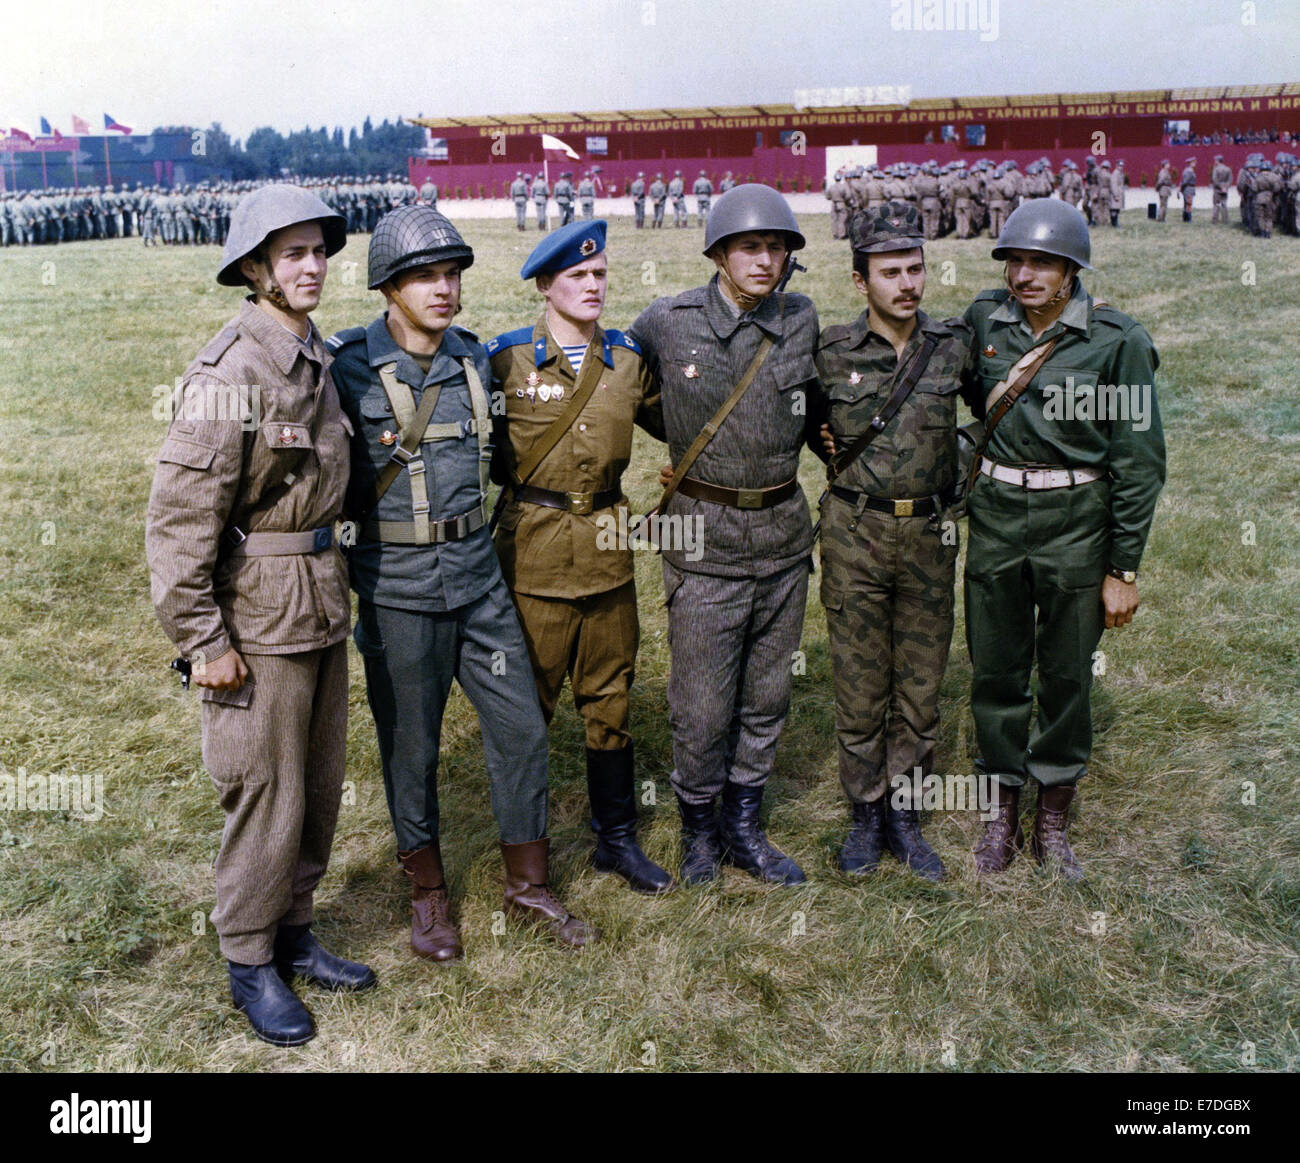 Soldiers from the various armed forces of the Warsaw Pact countries pose for a photo on an assembly ground in Czechoslovakia, 10 September 1984. The unified forces of the Warsaw Pact countries take place in the CSSR near the East German border from 05 to 14 September 1984. Photo: Ulrich Haessler Stock Photo